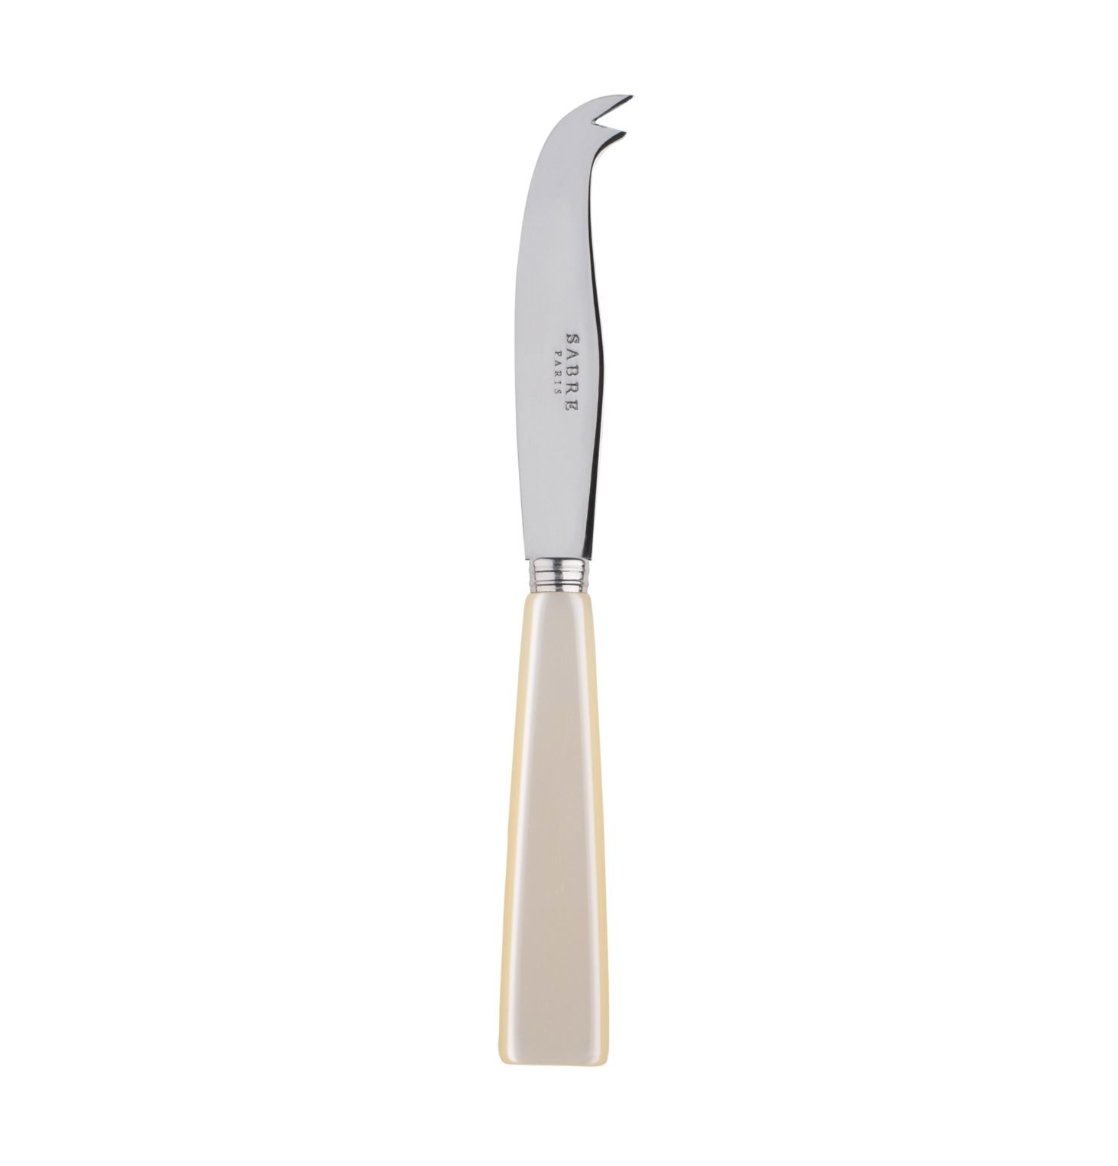 Cheese Knife Small - Icone Collection - Homebody Denver